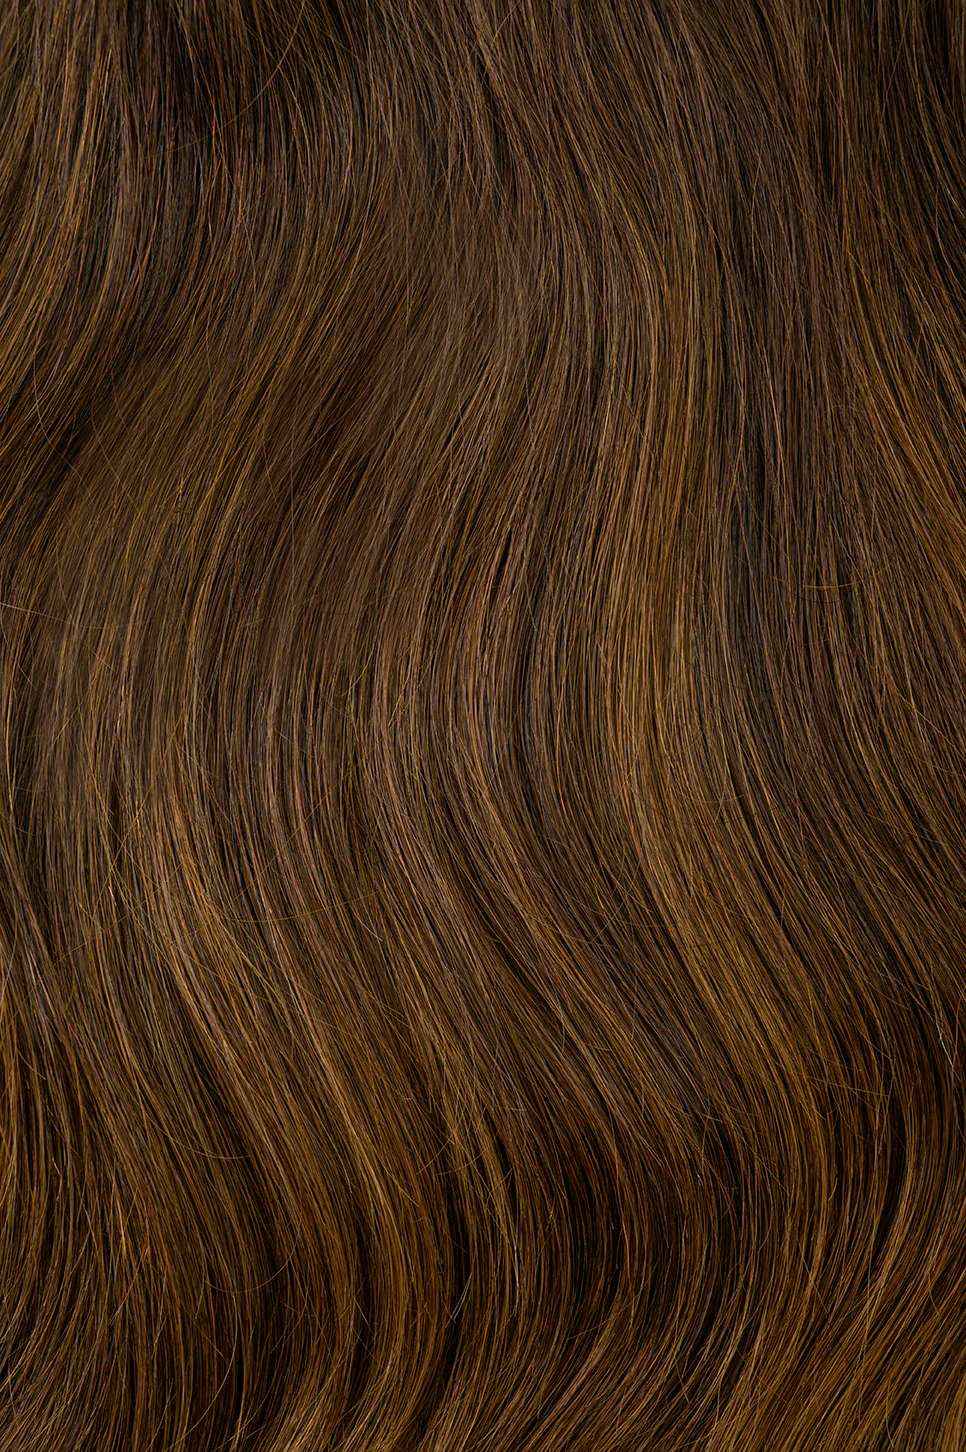 #Chocolate Brown Balayage Invisi Tape Hair Extensions